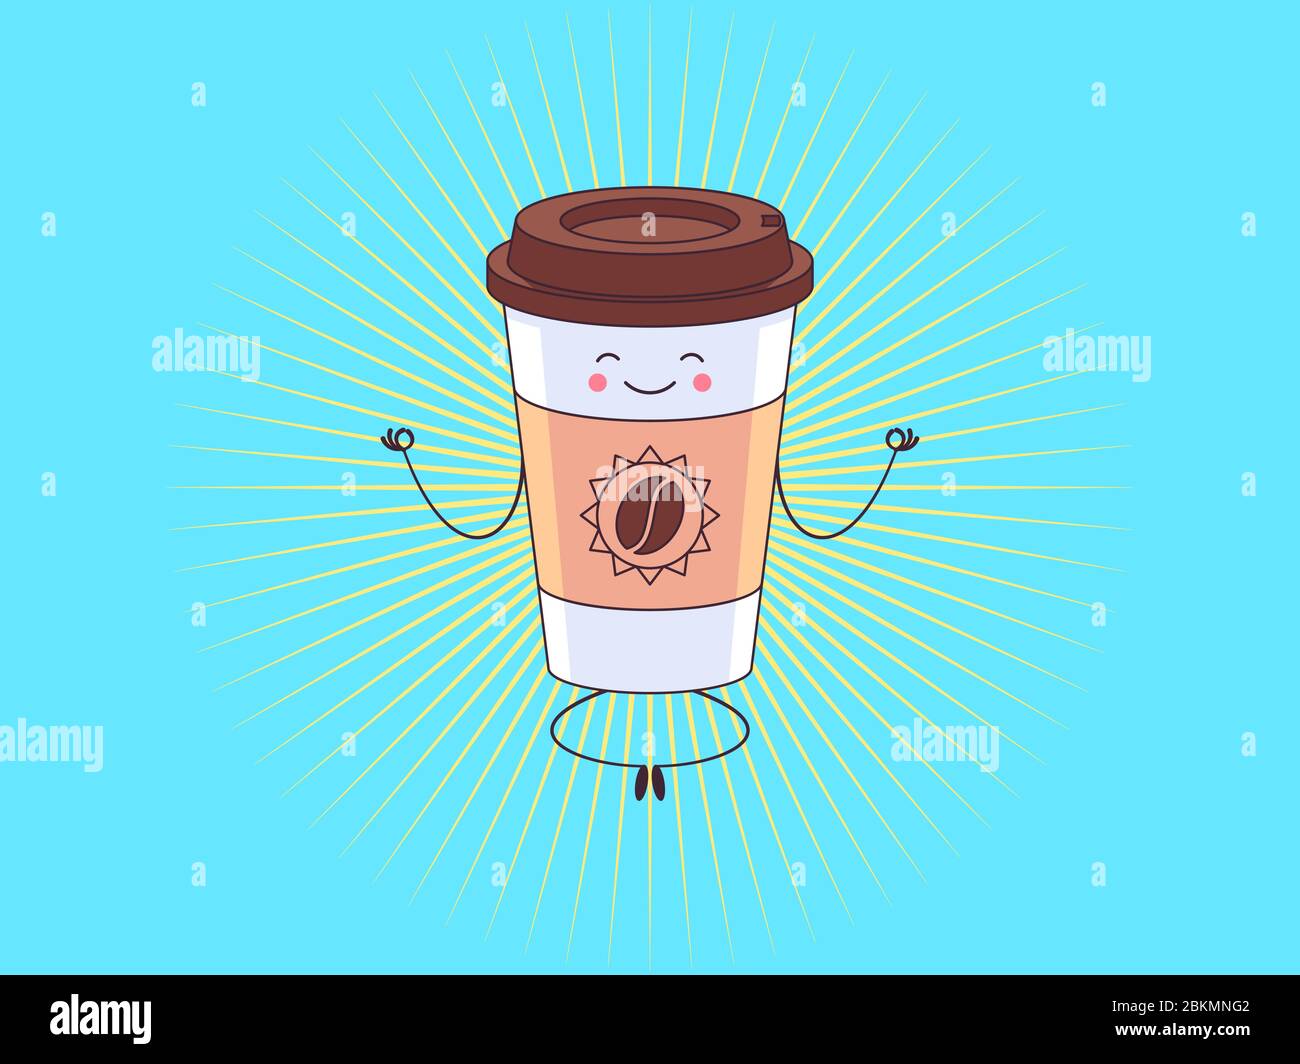 https://c8.alamy.com/comp/2BKMNG2/morning-meditation-with-coffee-cup-cartoon-cute-character-and-mascot-for-cafeteria-coffee-to-go-latte-cappuccino-americano-espresso-yoga-levit-2BKMNG2.jpg